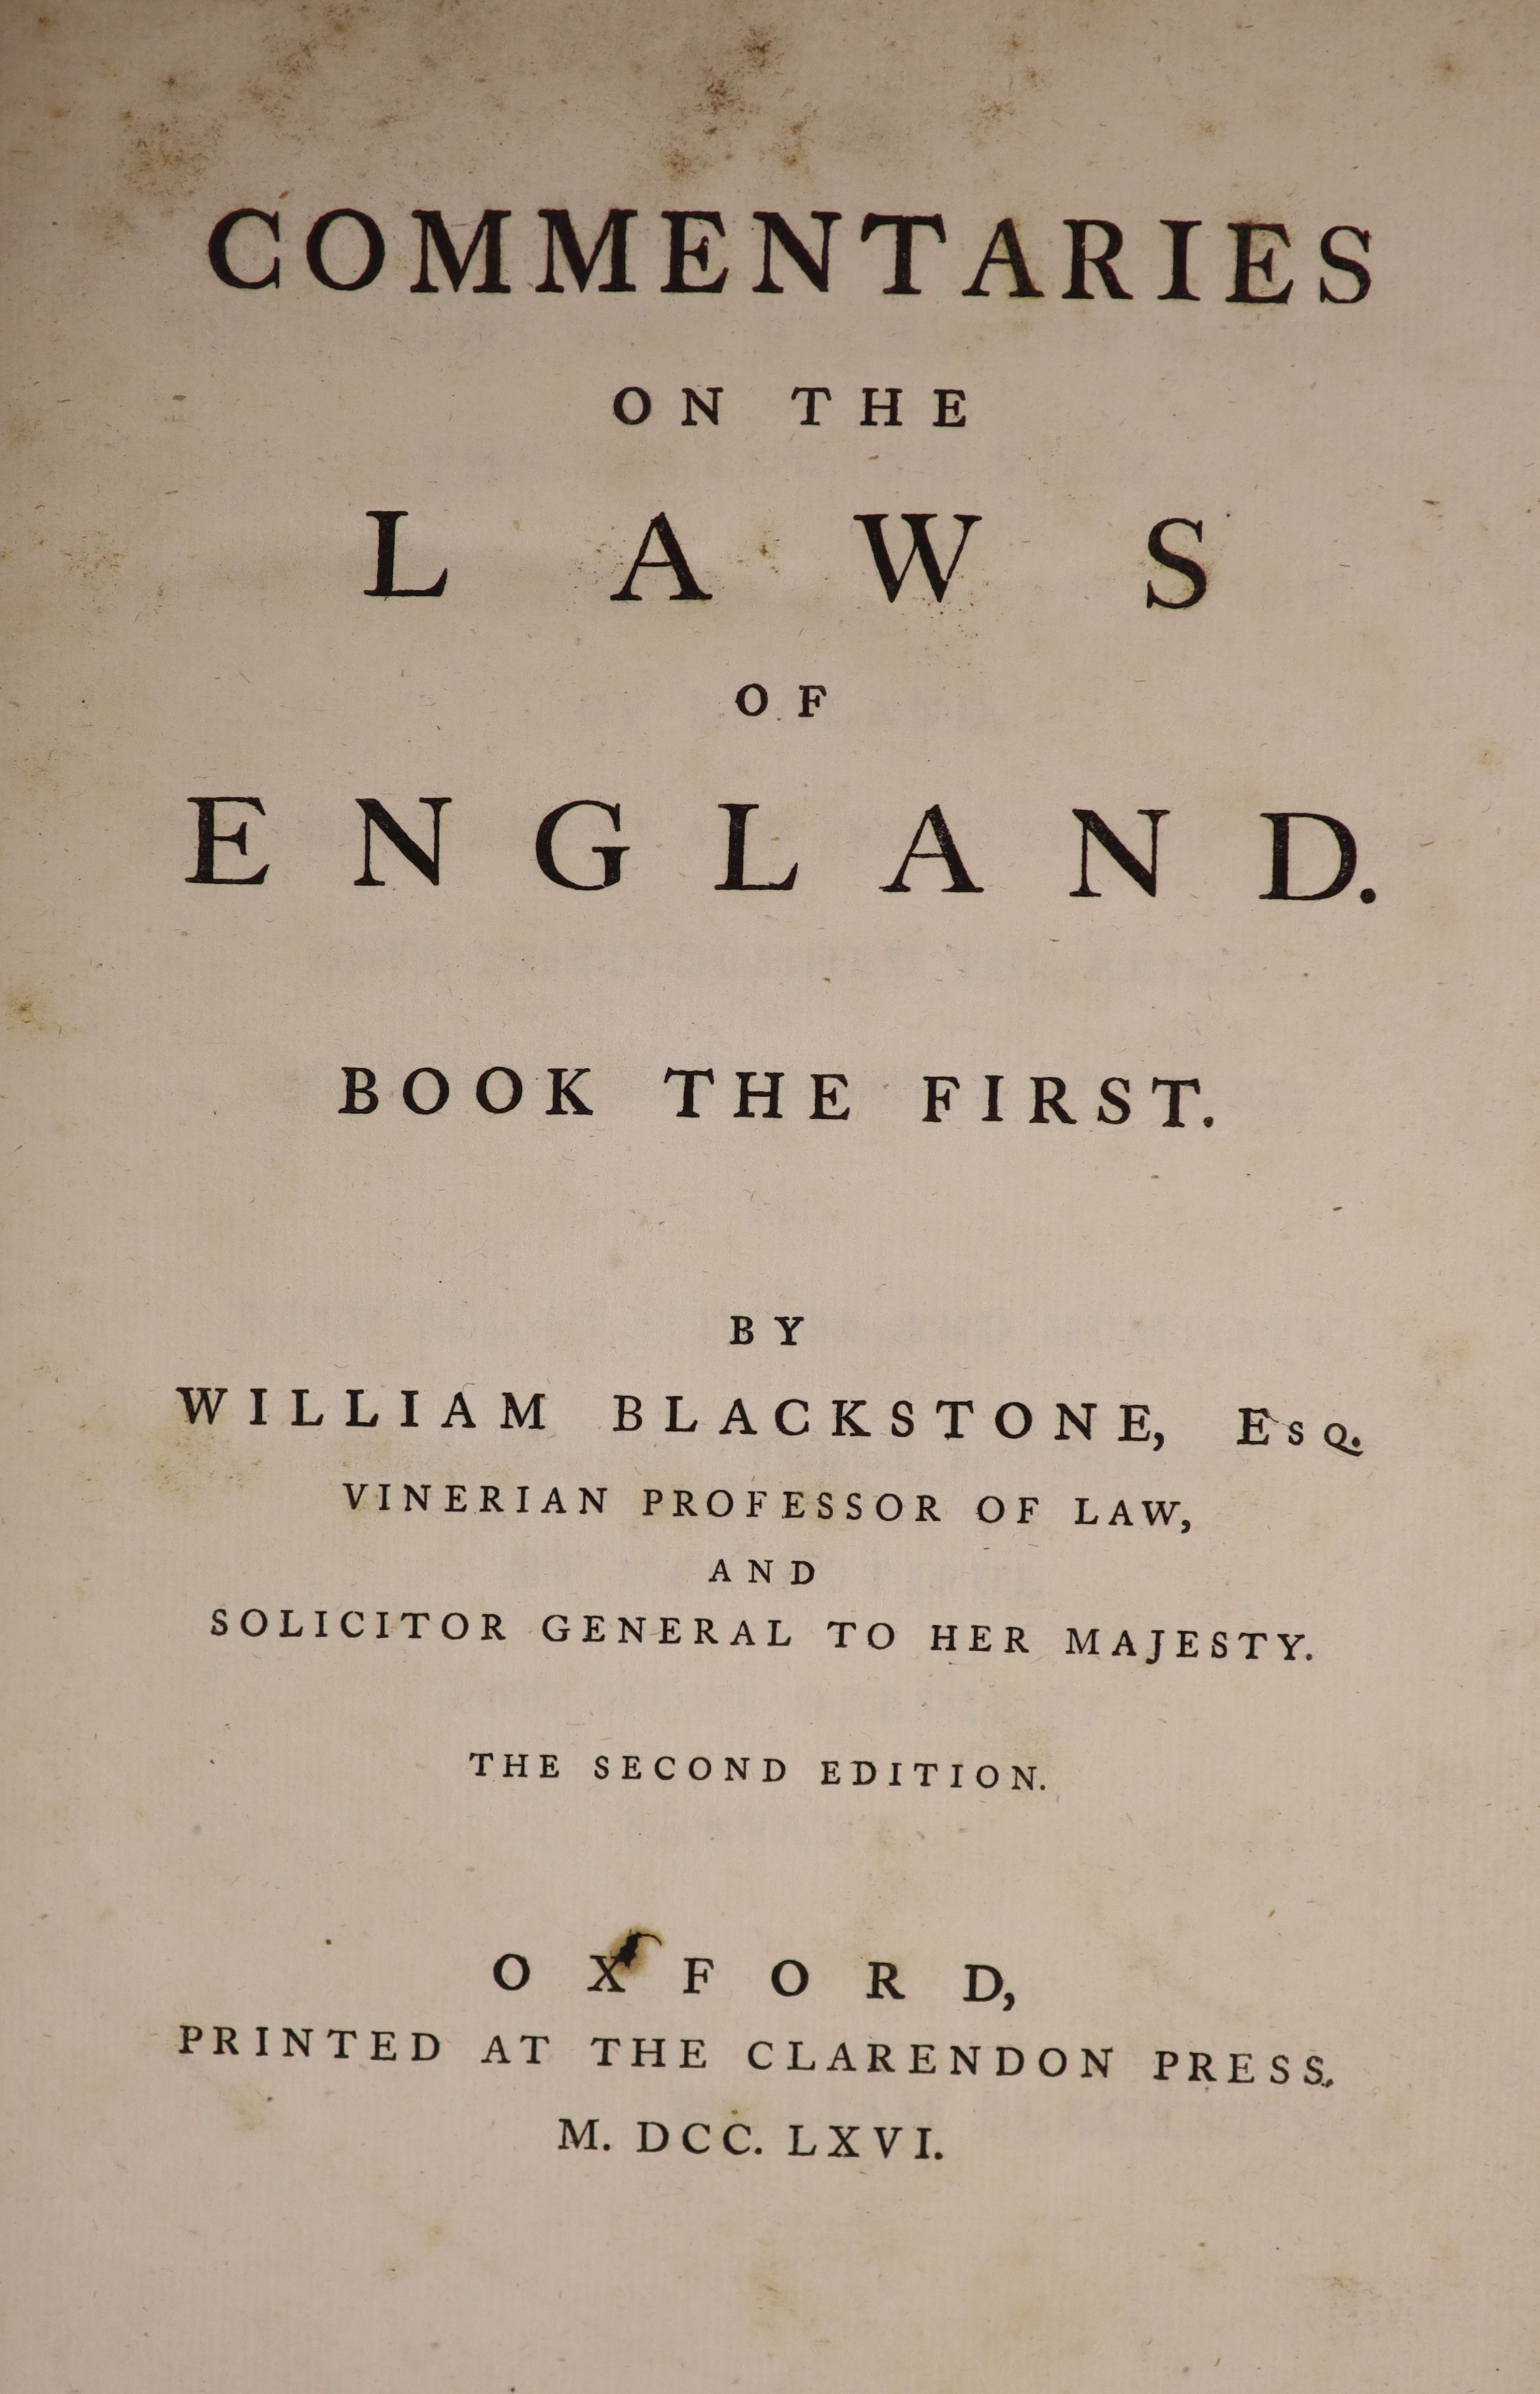 Blackstone, William - Commentaries on the Laws of England. vols 1-3 (only, ex.4.) 2nd (vol.I) and 1st editions. 2 tables (1 folded); uncut in original grey boards, 19th cent.